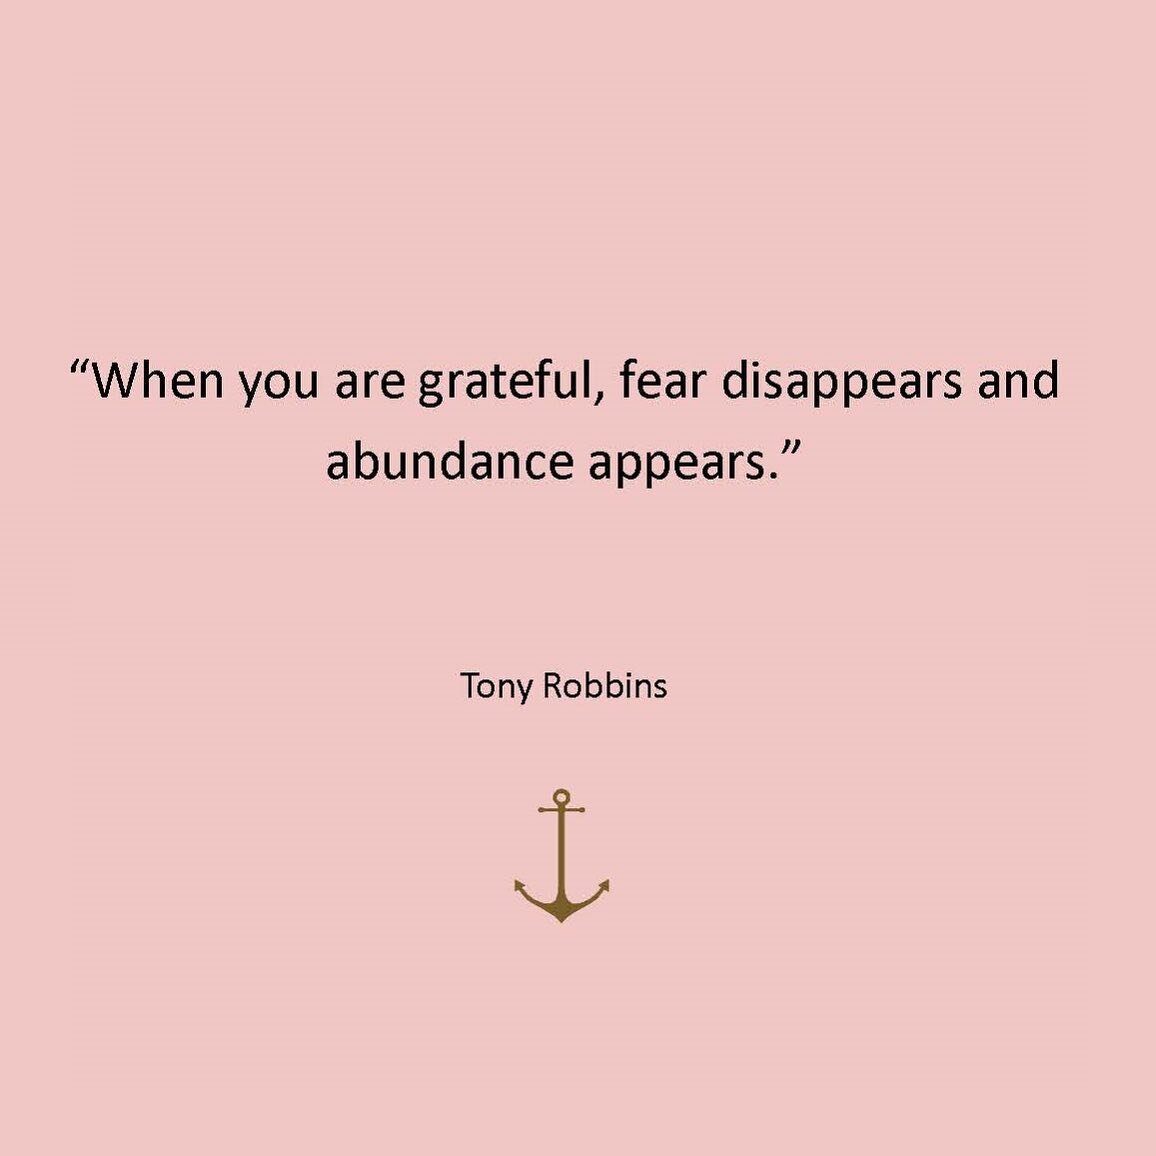 📚 &lsquo;Taught a wonderful class today at @grubbco and shared some insightful discussions.  This quote from Tony Robbins really resonated with one of them. 
.
In this fast-paced seller&rsquo;s market, it&rsquo;s important to lay good foundations (e